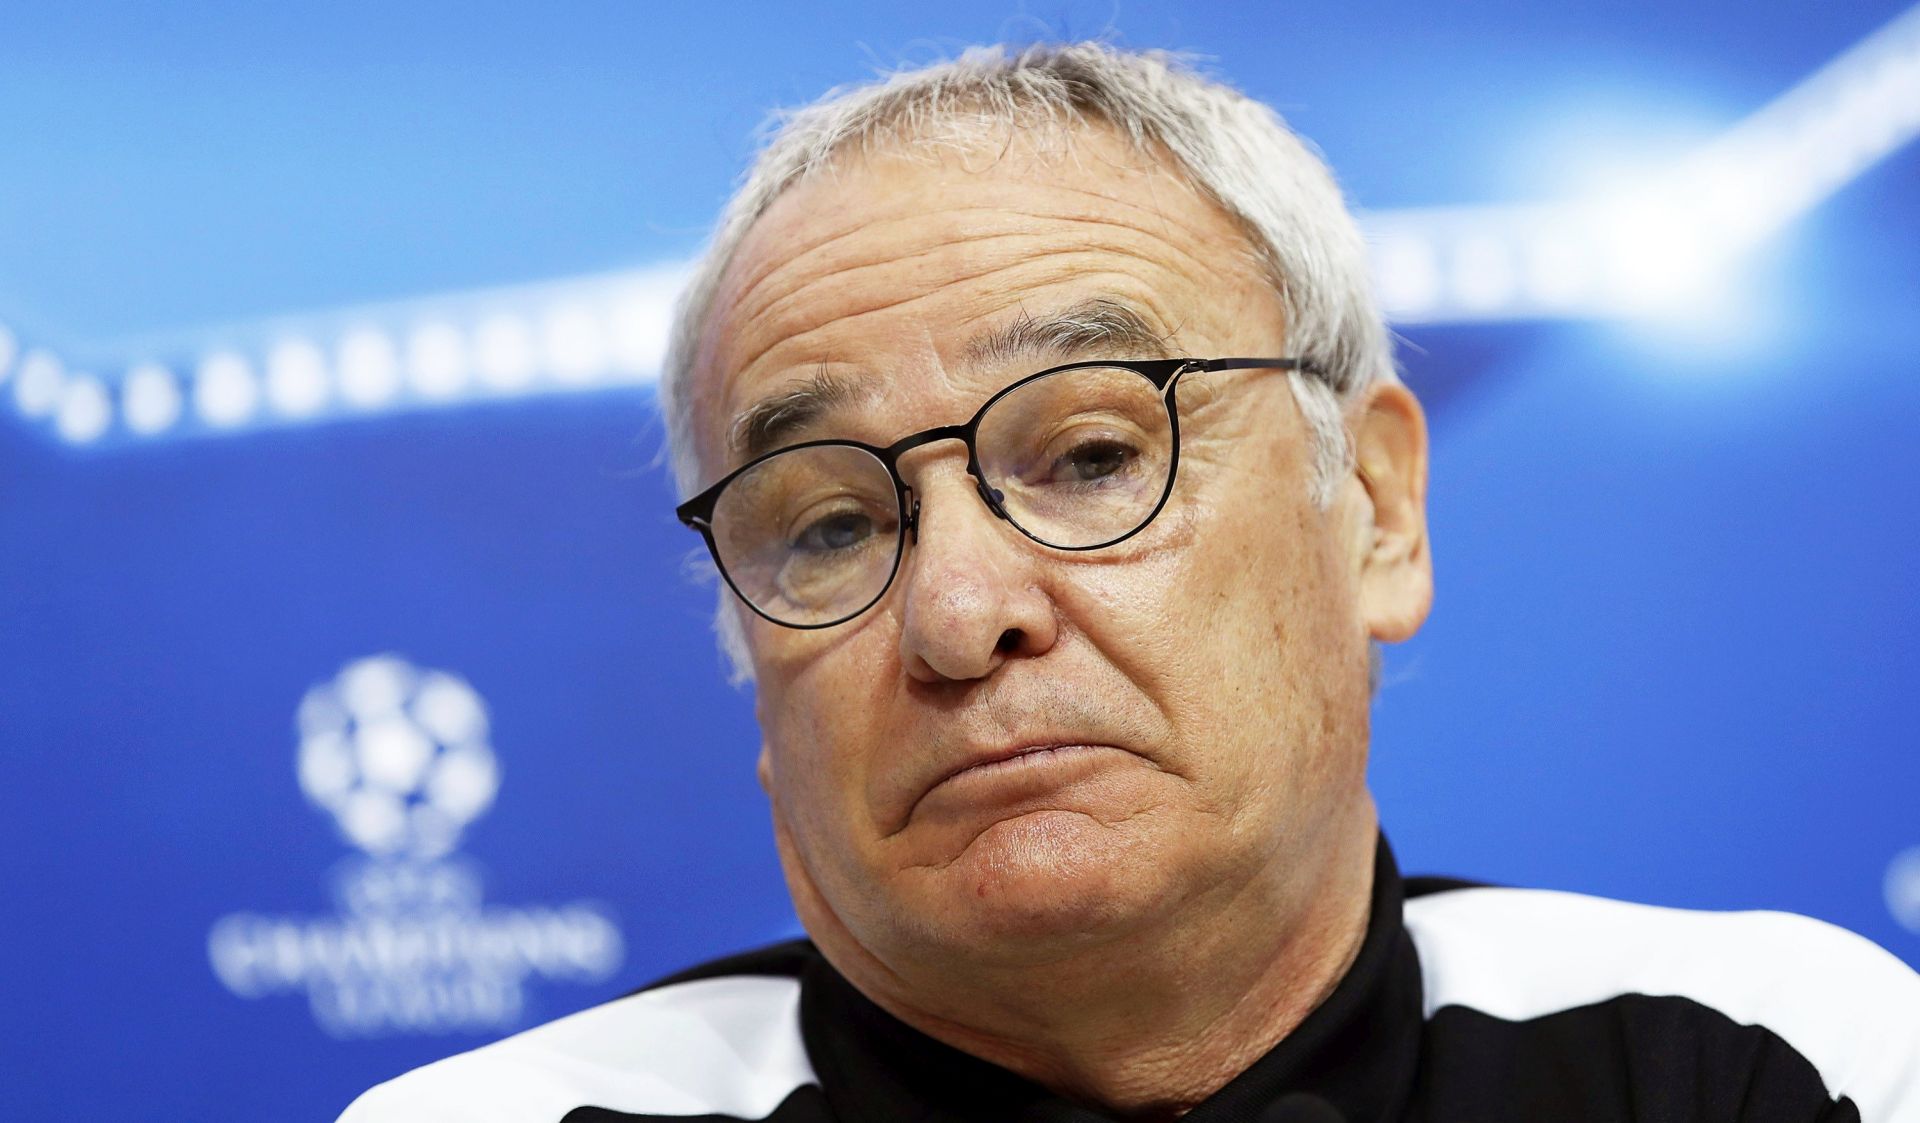 epa05811182 (FILE) A file picture dated 21 February 2017 of Leicester City's manager Claudio Ranieri during a press conference at the Sanchez Pizjuan stadium in Seville, southern Spain. Italian manager Claudio Ranieri has been sacked by Leicester City, the English Premier League side confirmed on 23 February 2017.  EPA/JULIO MUNOZ